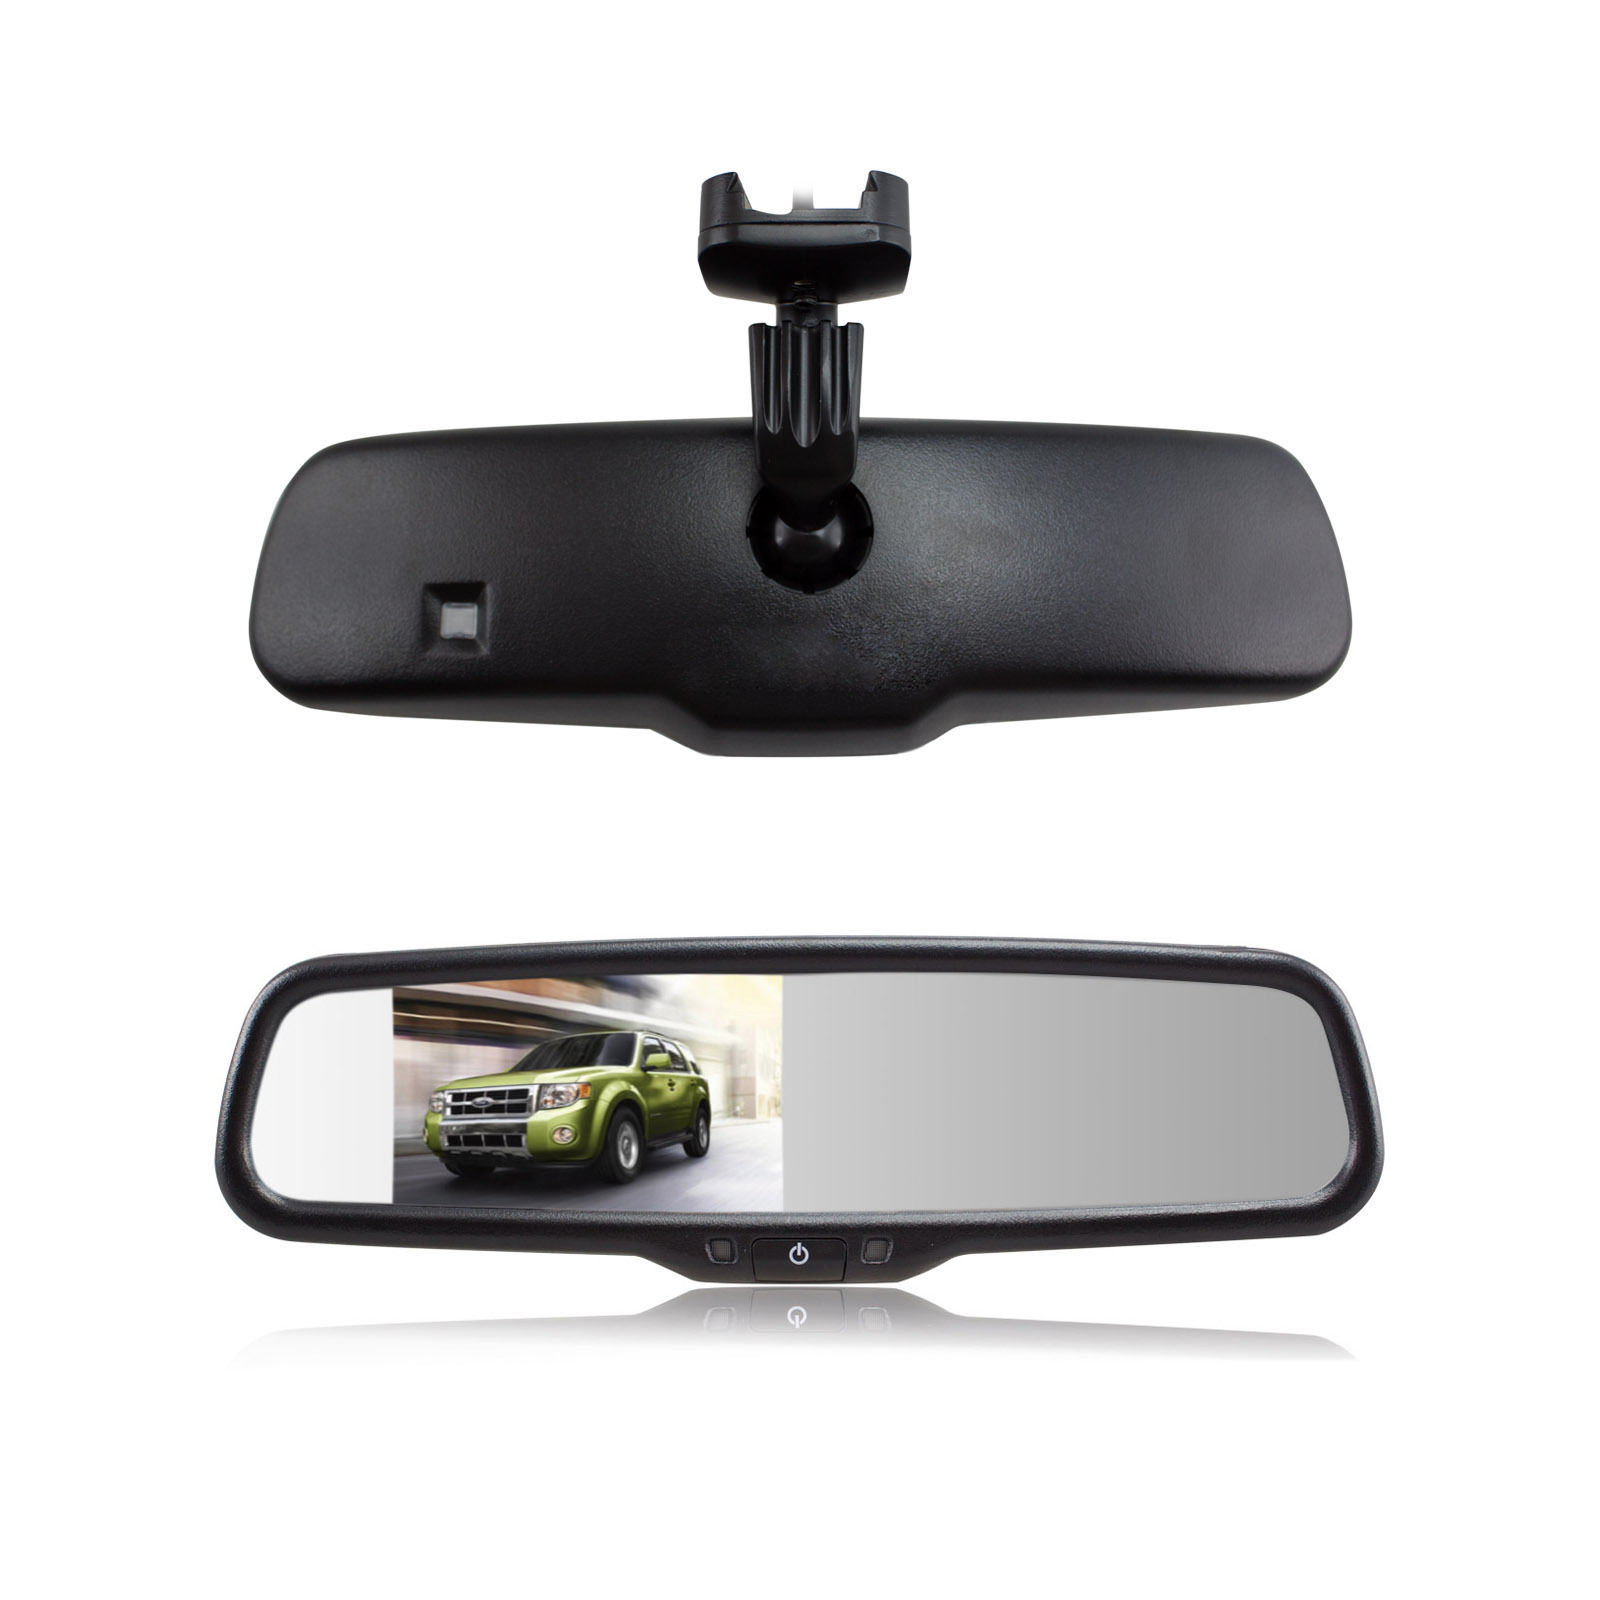 Rear View Mirror Monitor Display System for Camera Car 4.3